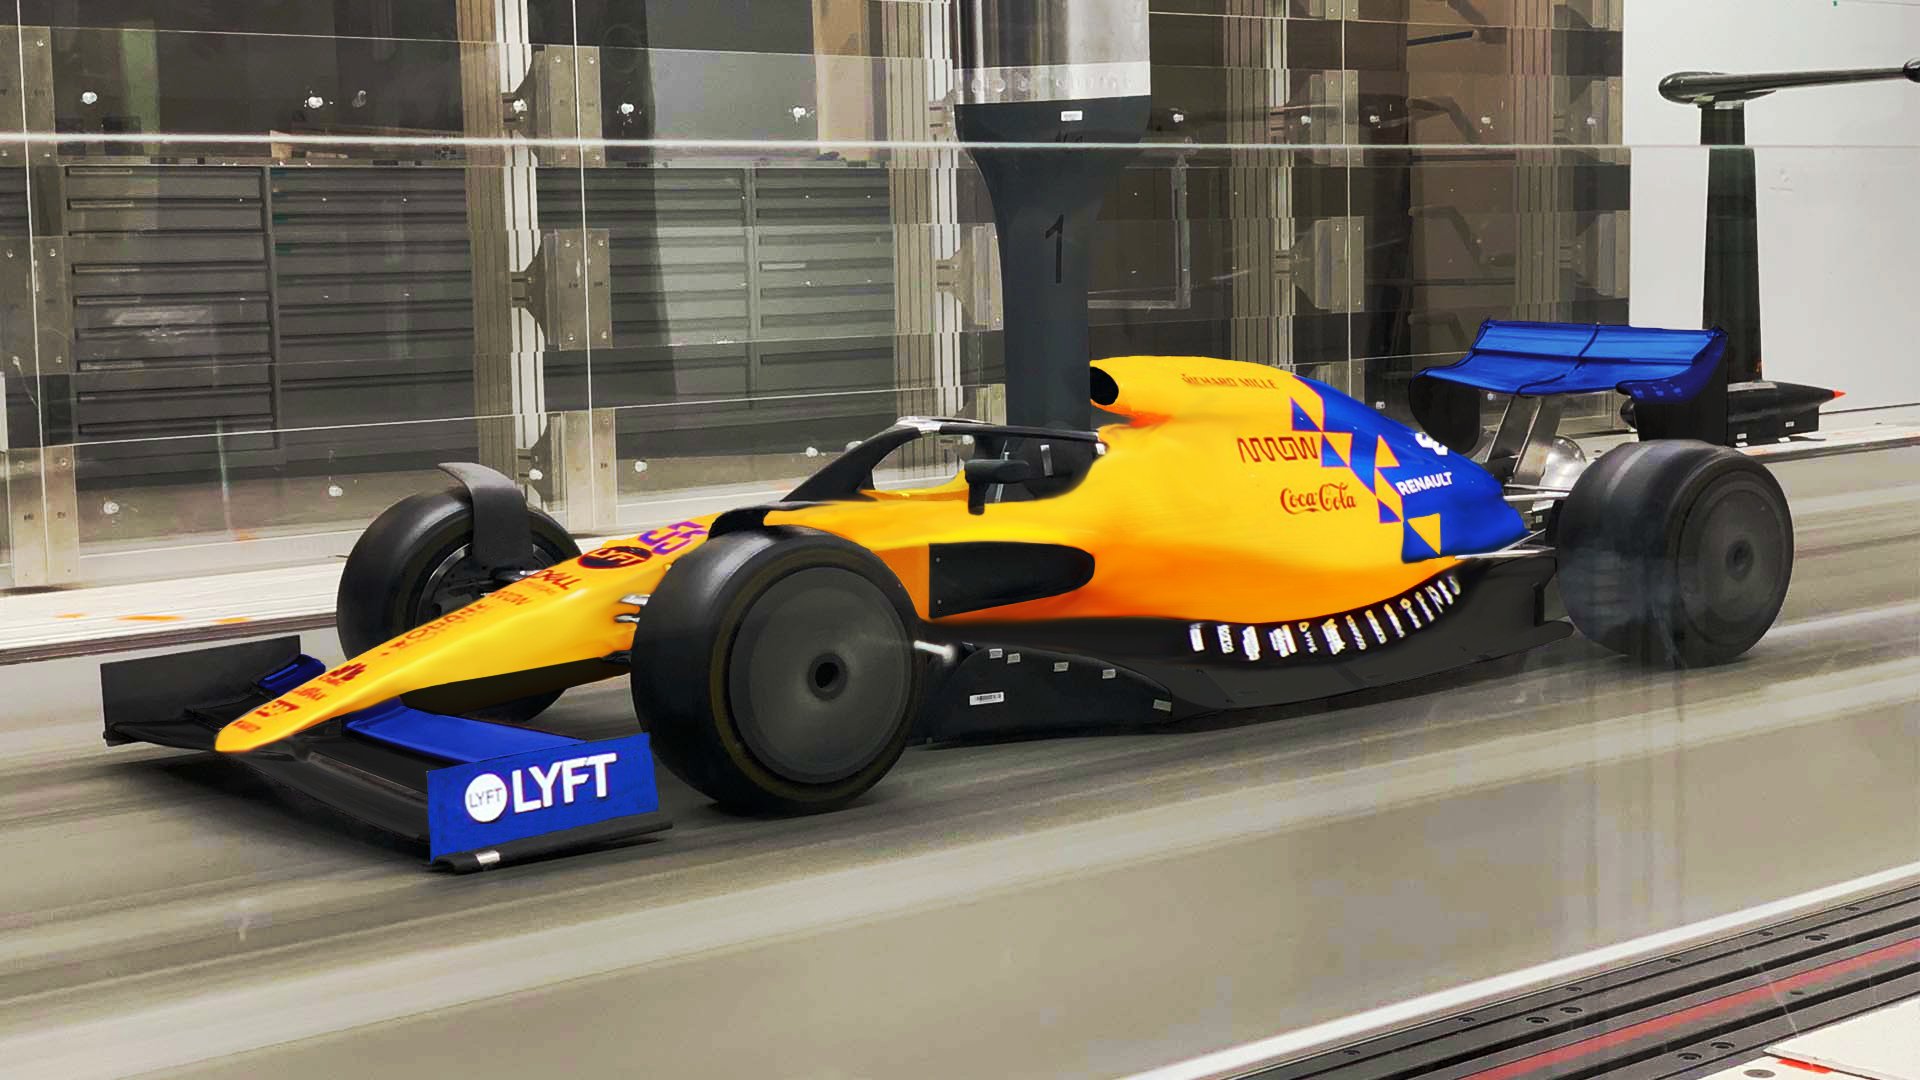 F1 2021 Wind Tunnel Model with McLaren's Livery (Not the best job)